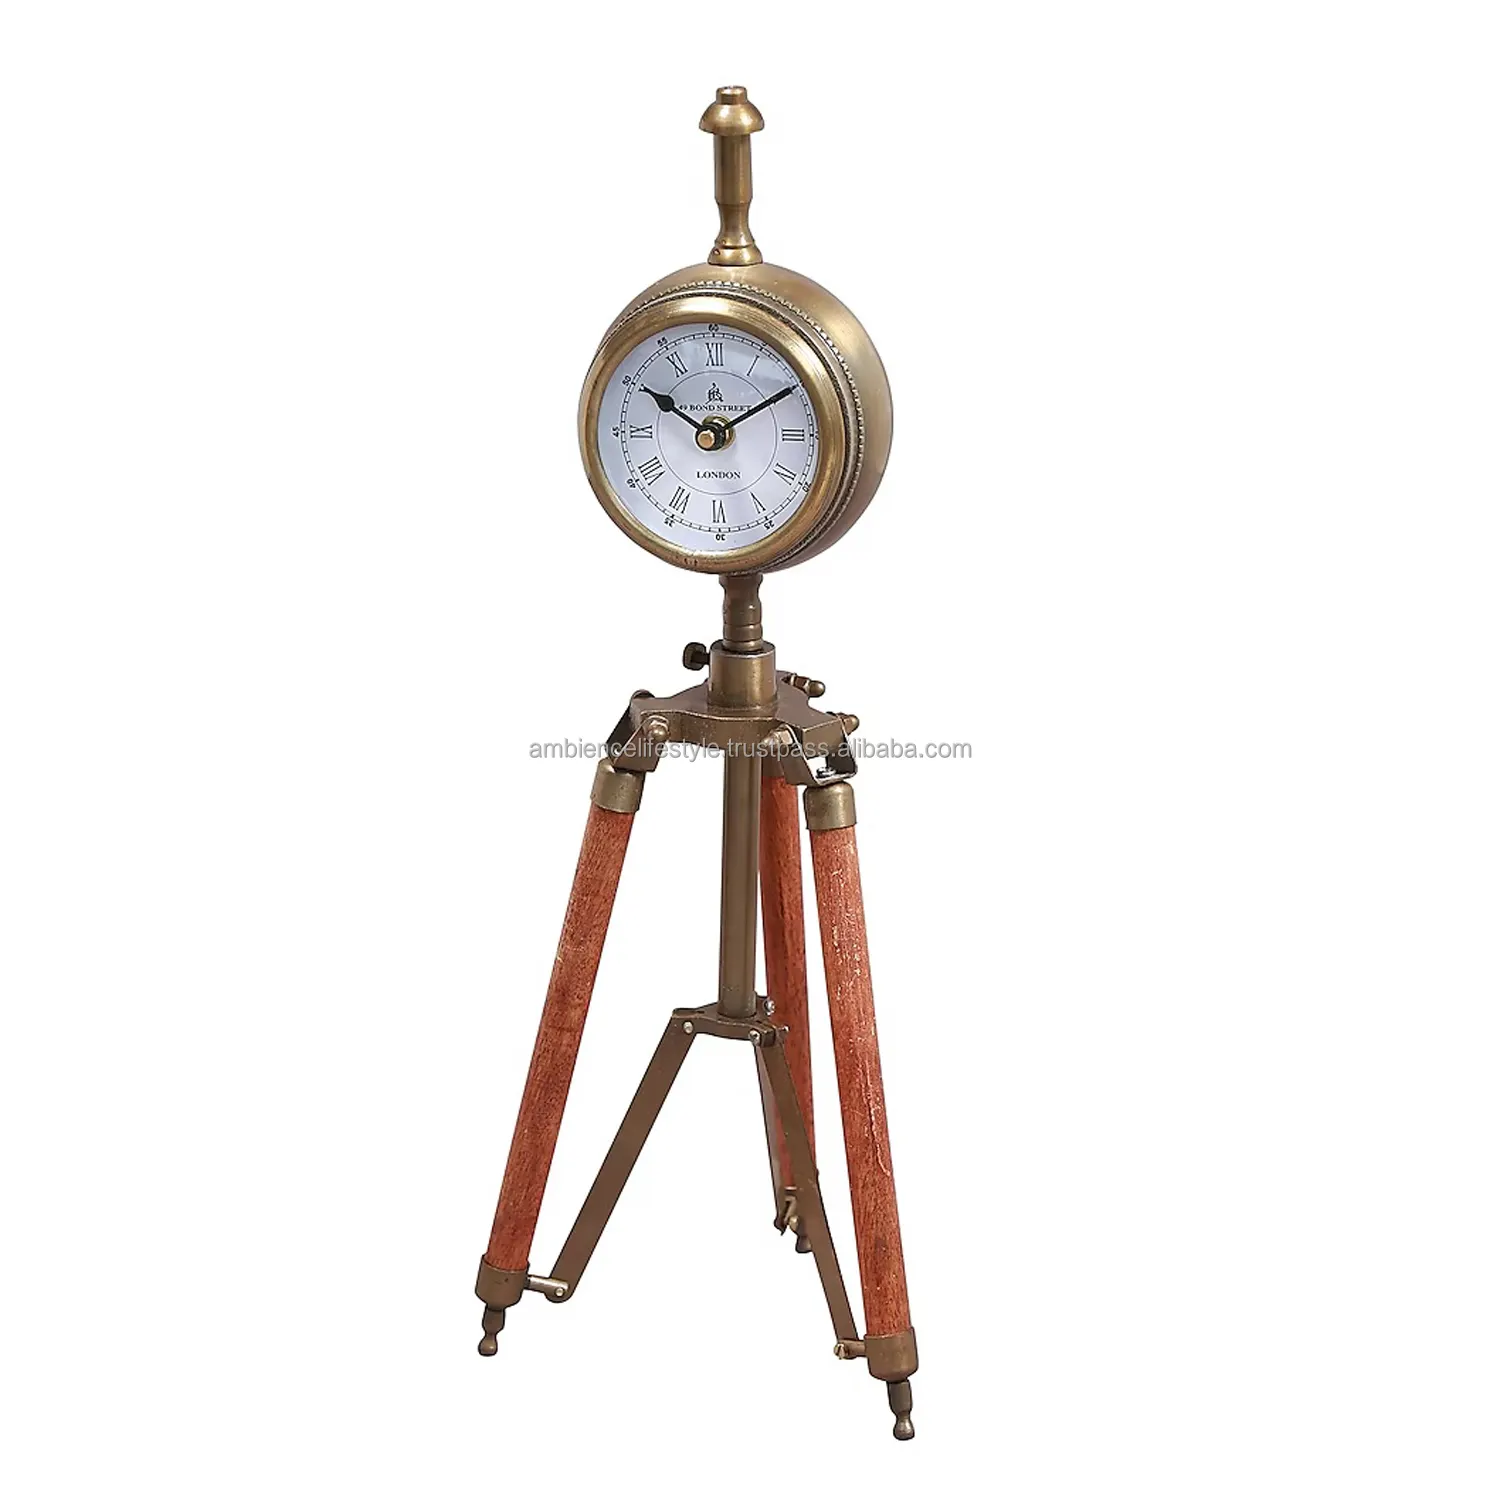 High Quality Solid Brass & Wooden Decorative Polished Tripod Clock Nautical by Ambience Lifestyle